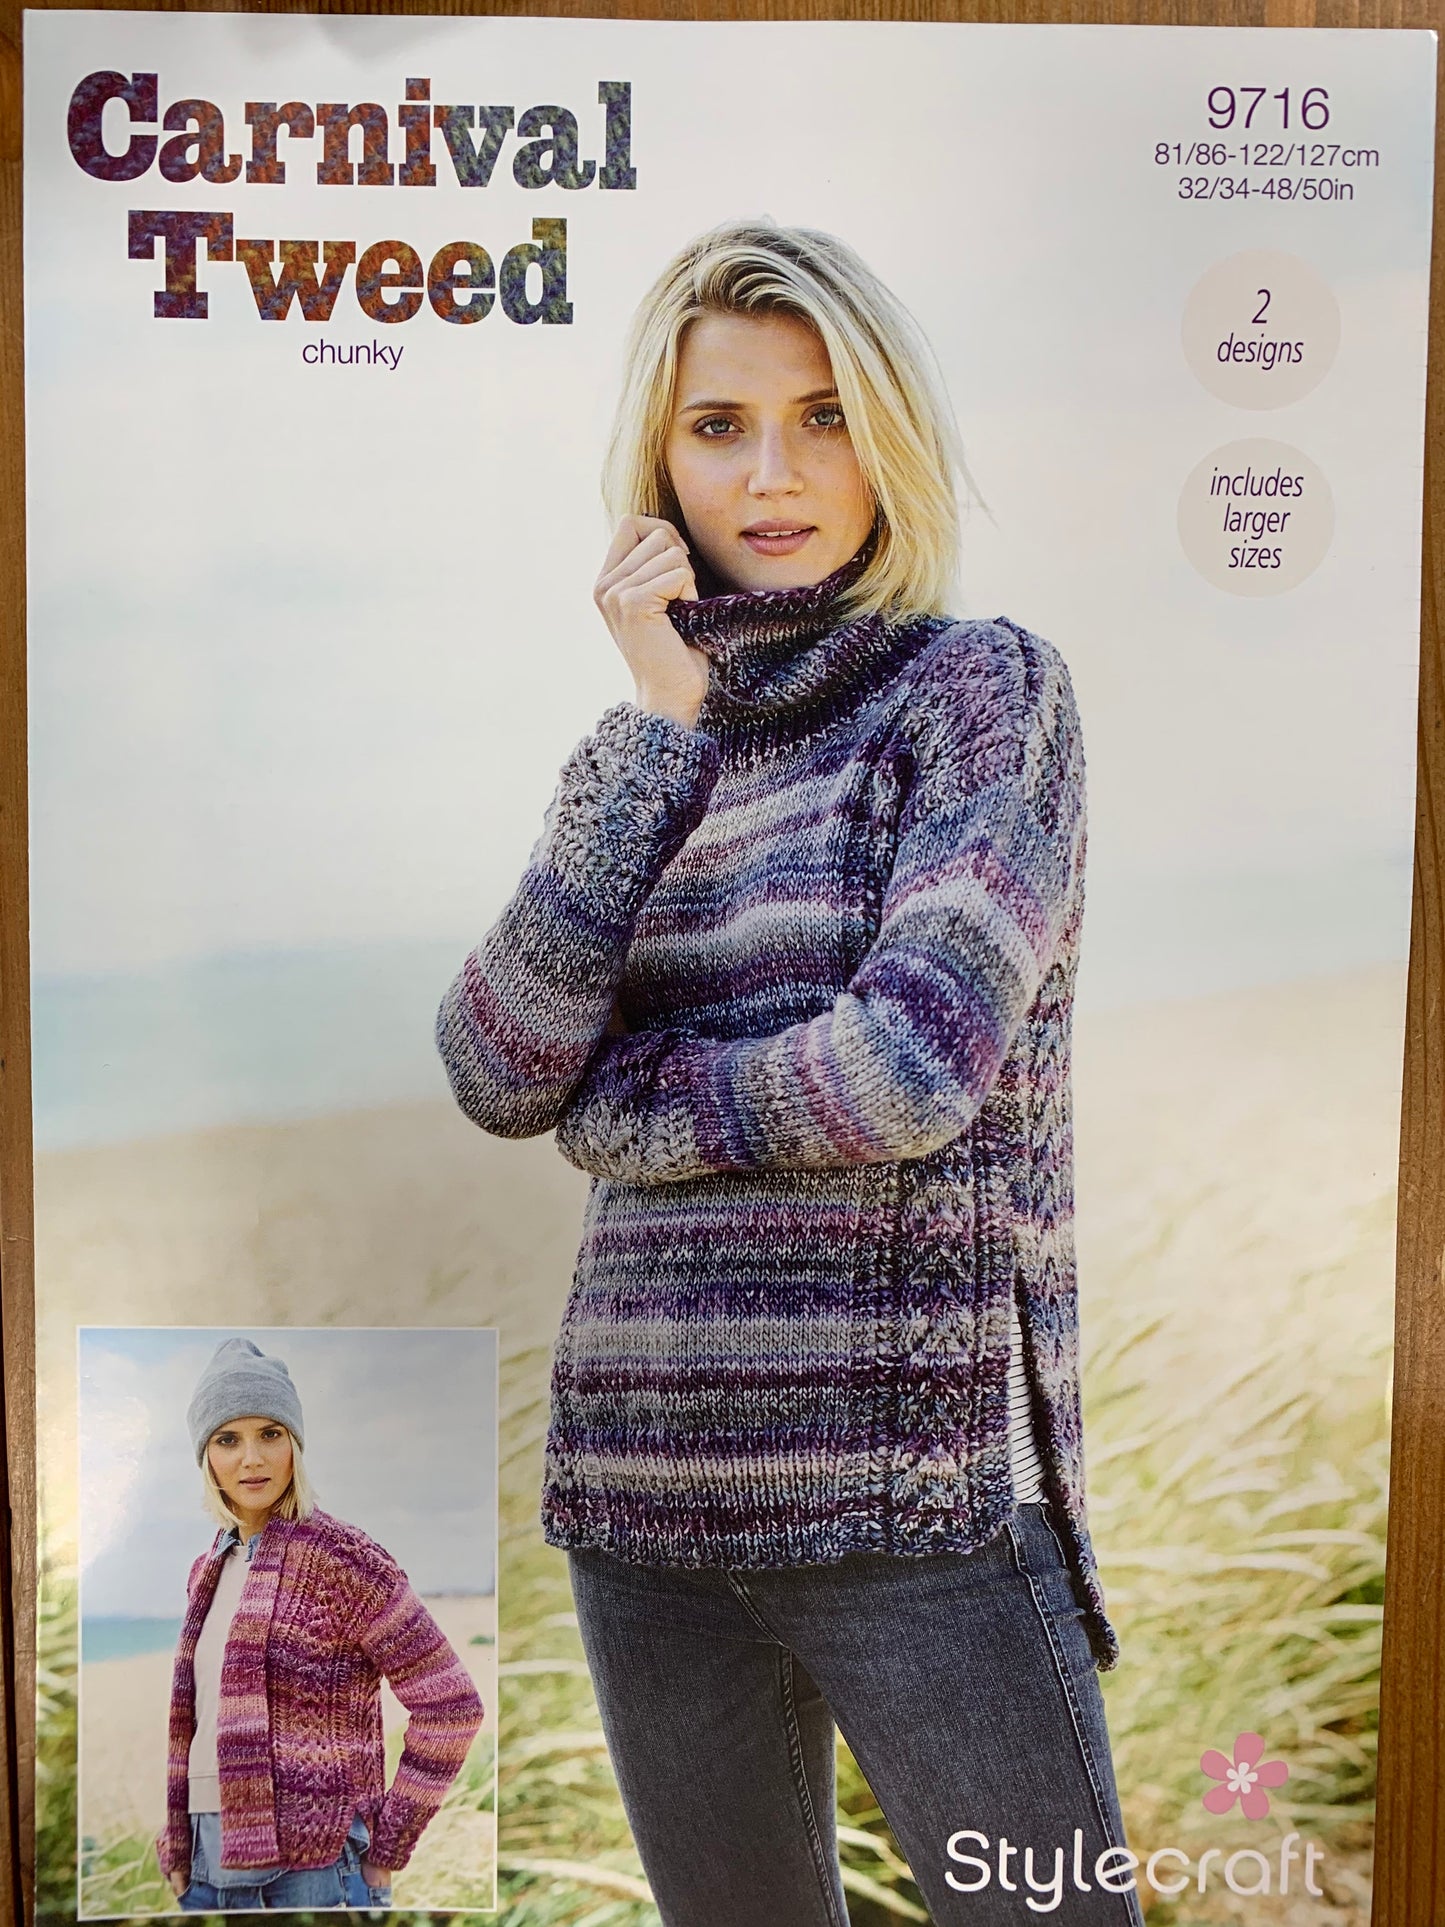 9716 Stylecraft Carnival Tweed chunky ladies sweater and cardigan knitting pattern